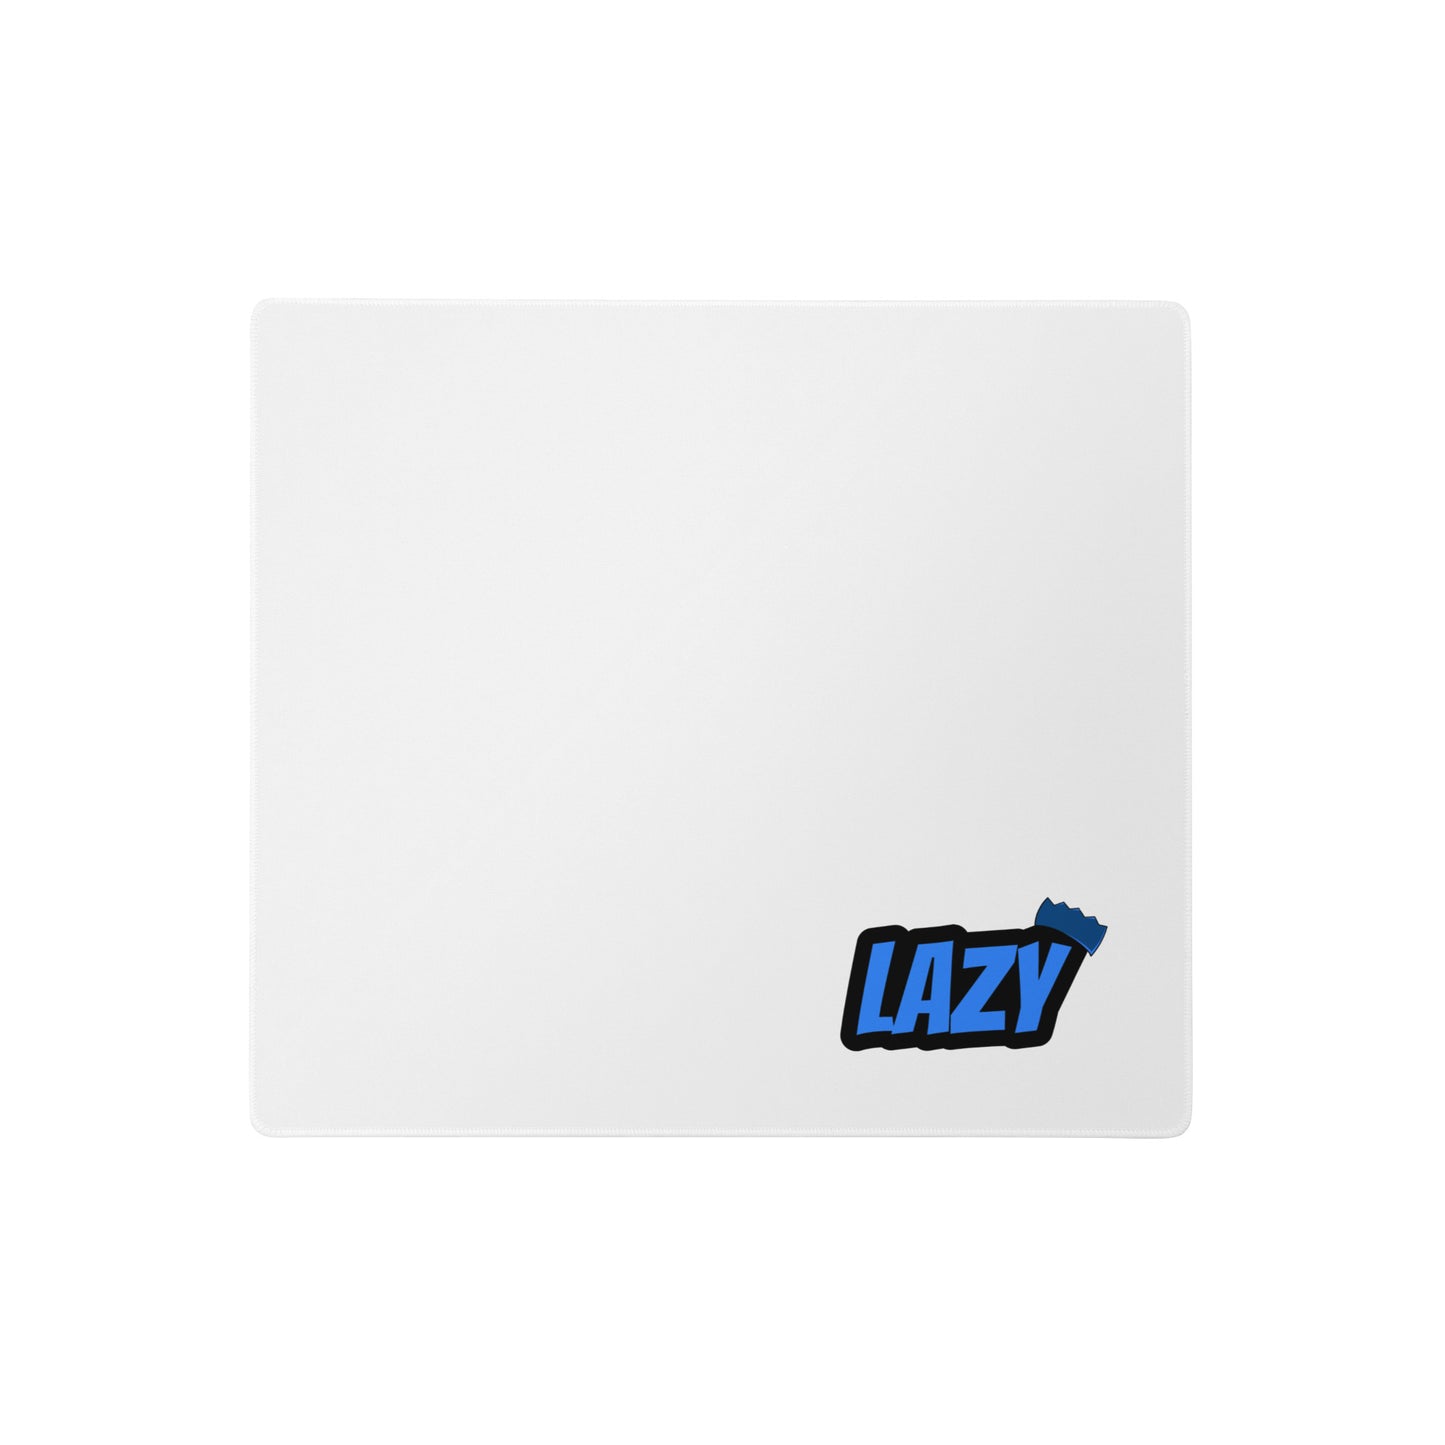 PHAT Gaming mouse pad